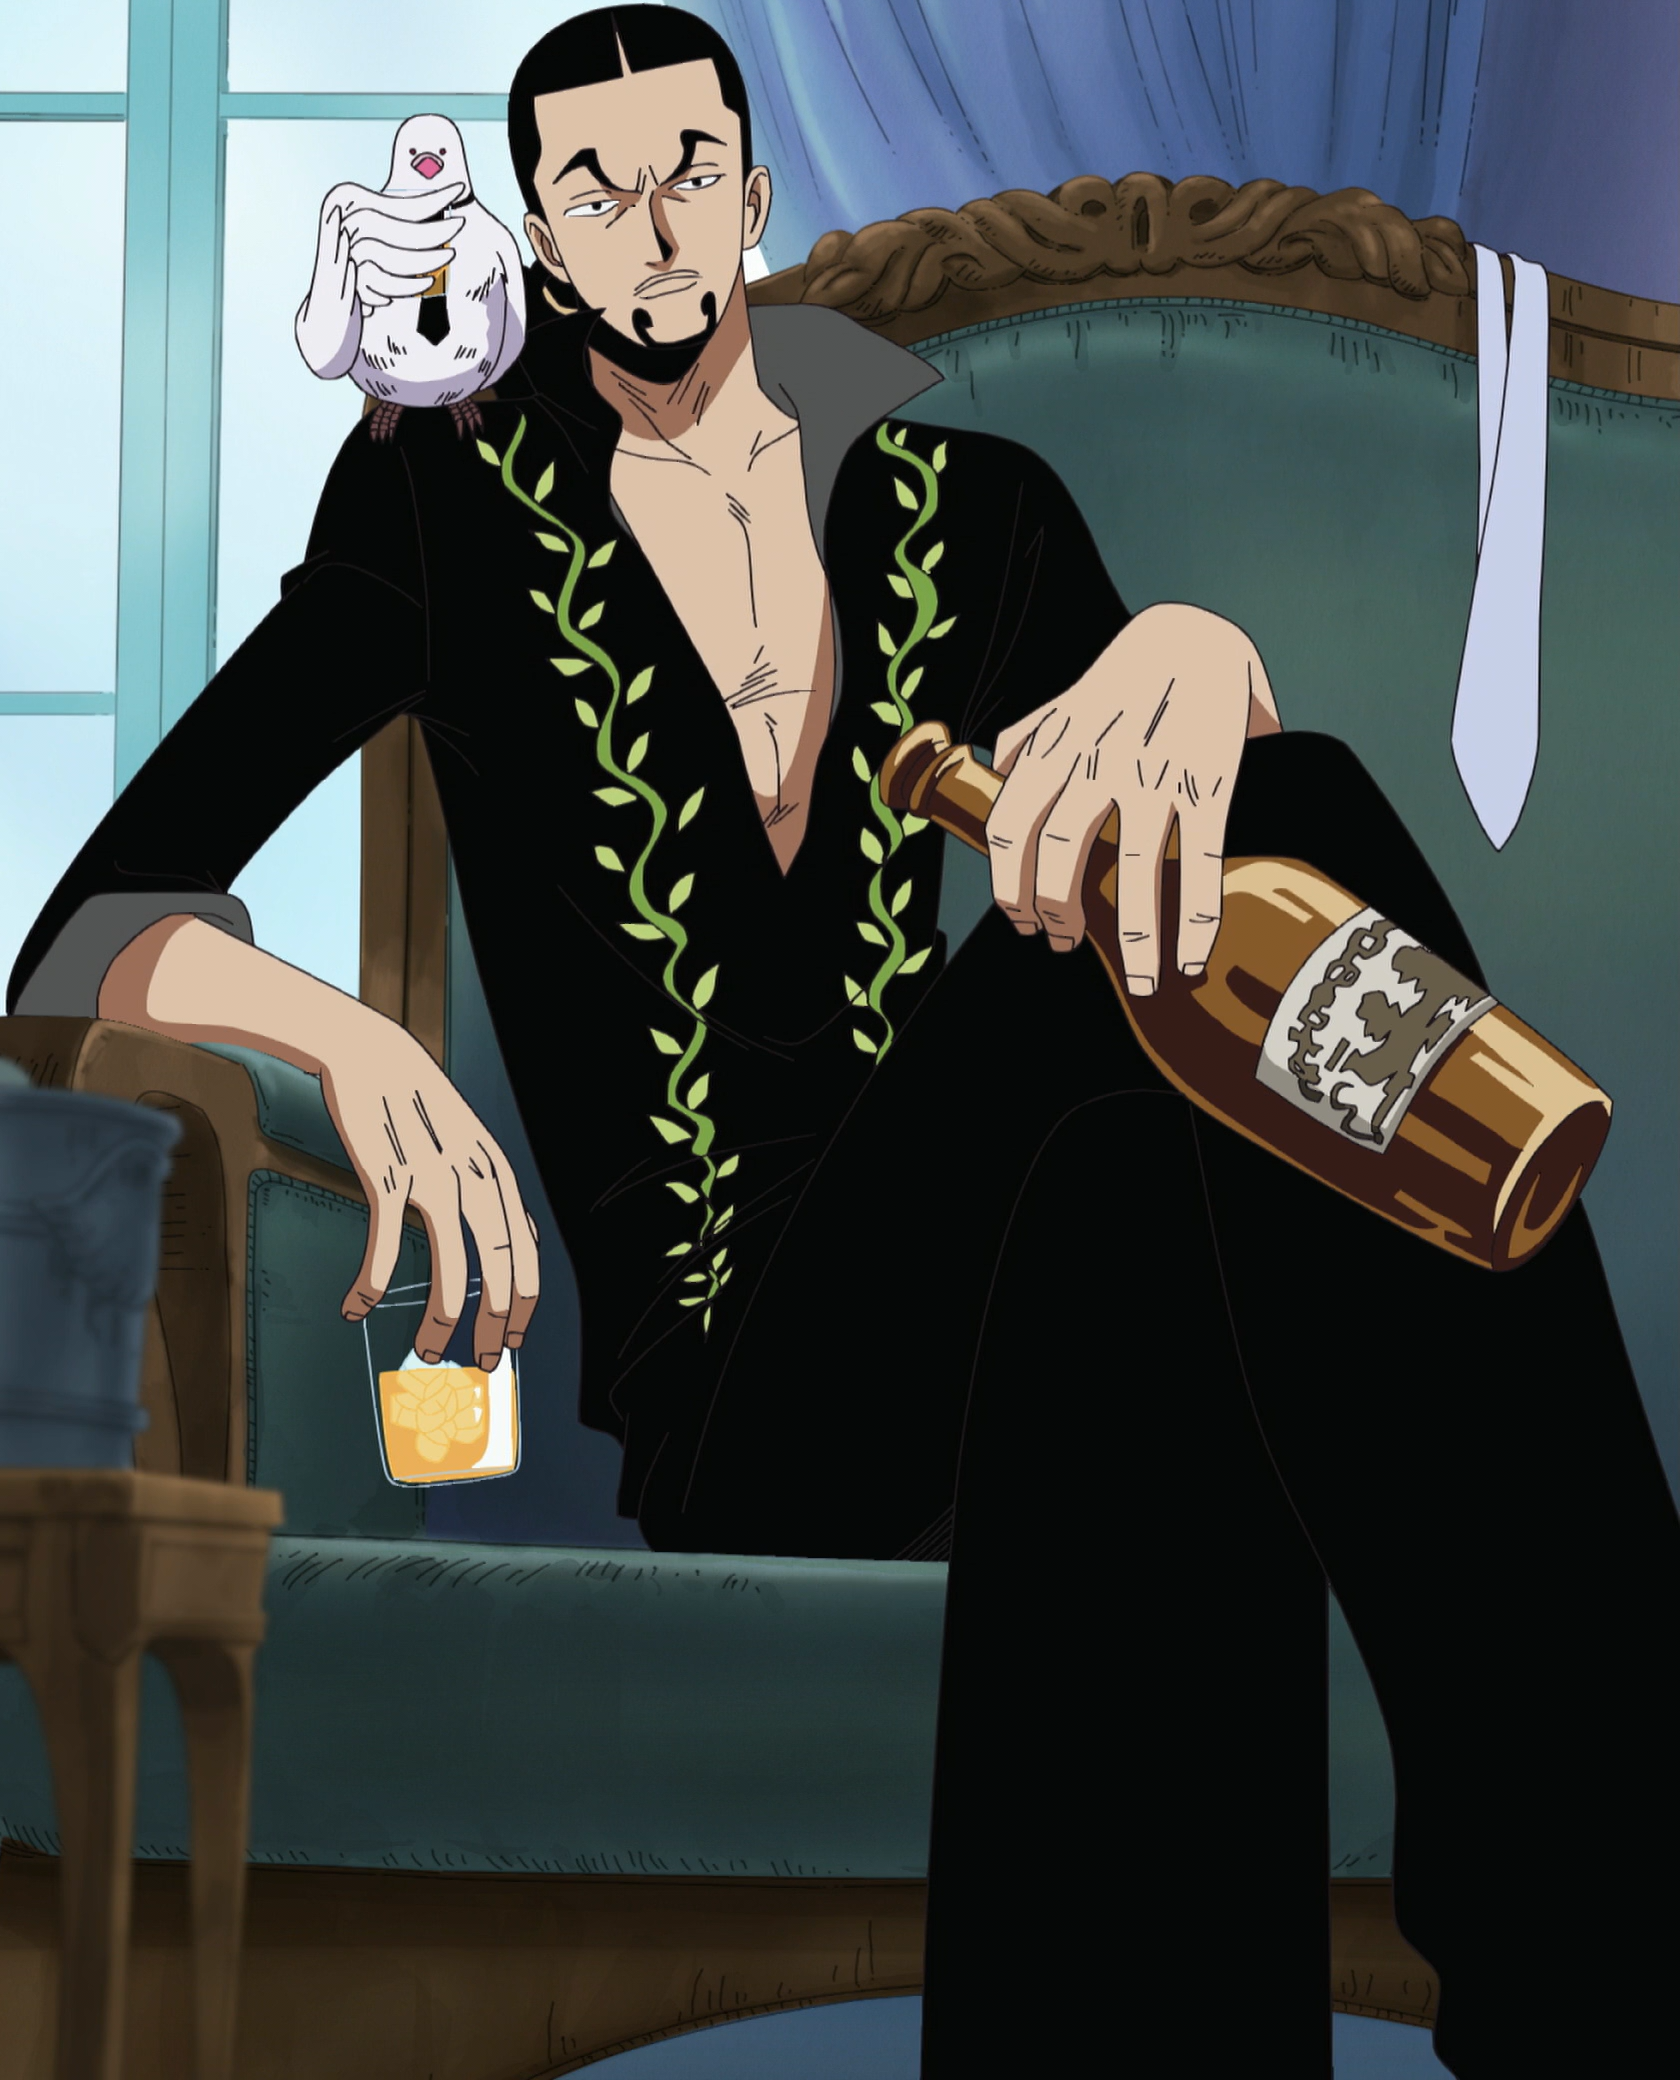 If Rob Lucci had managed to actually kill Luffy, would the rest of